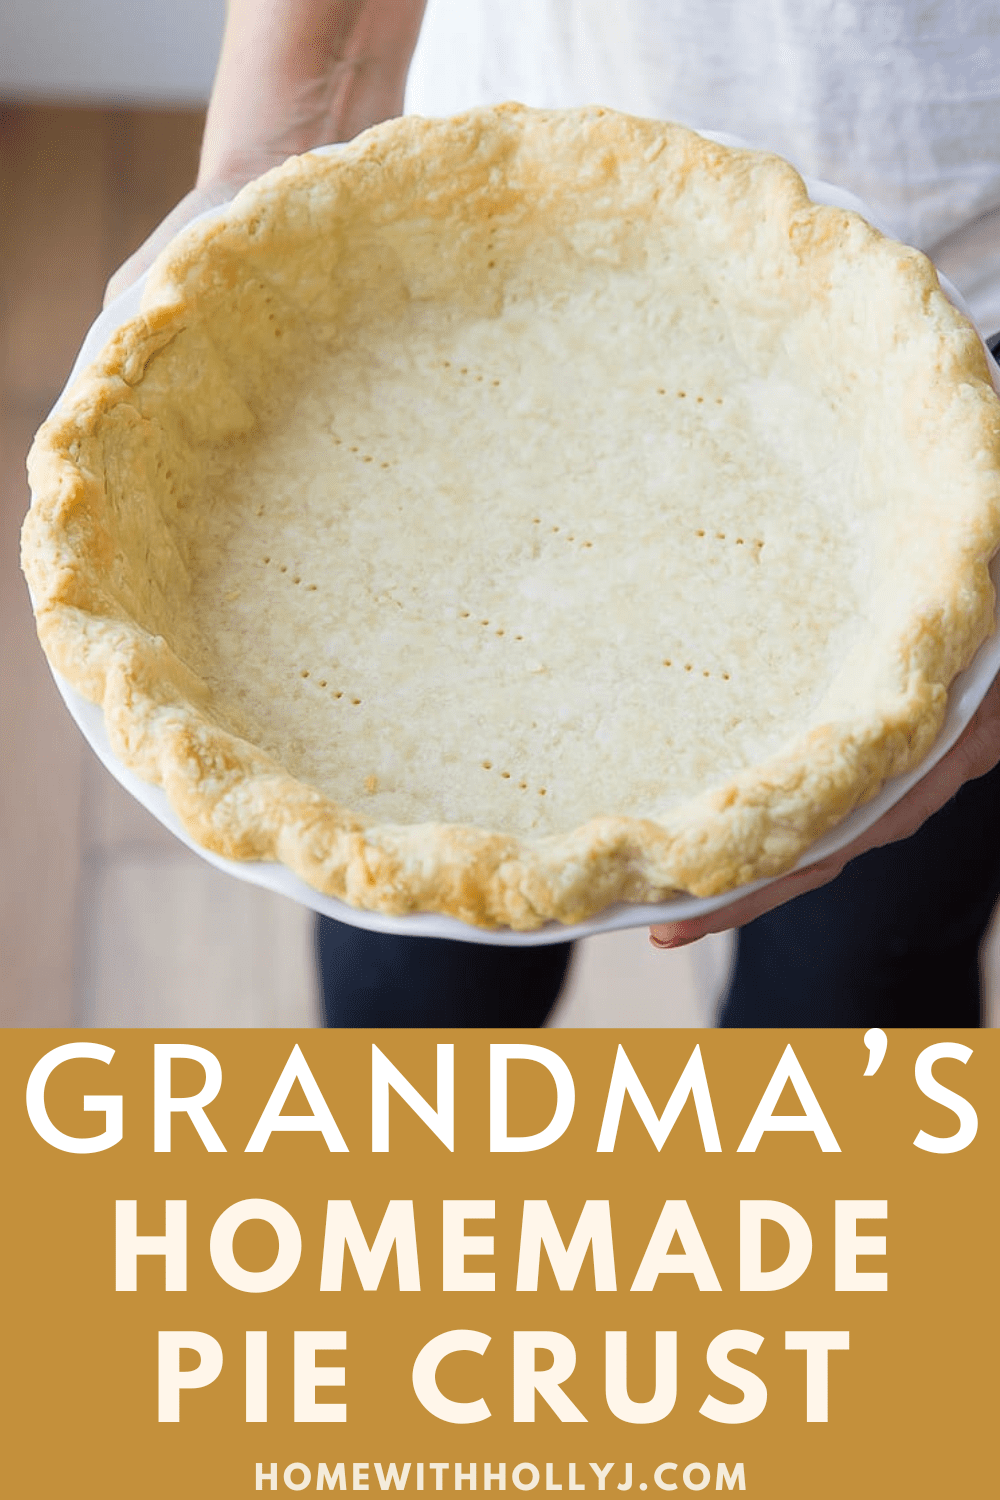 My grandma's homemade pie crust recipe is the best. It's so delicious, easy to make, and a favorite of our family.